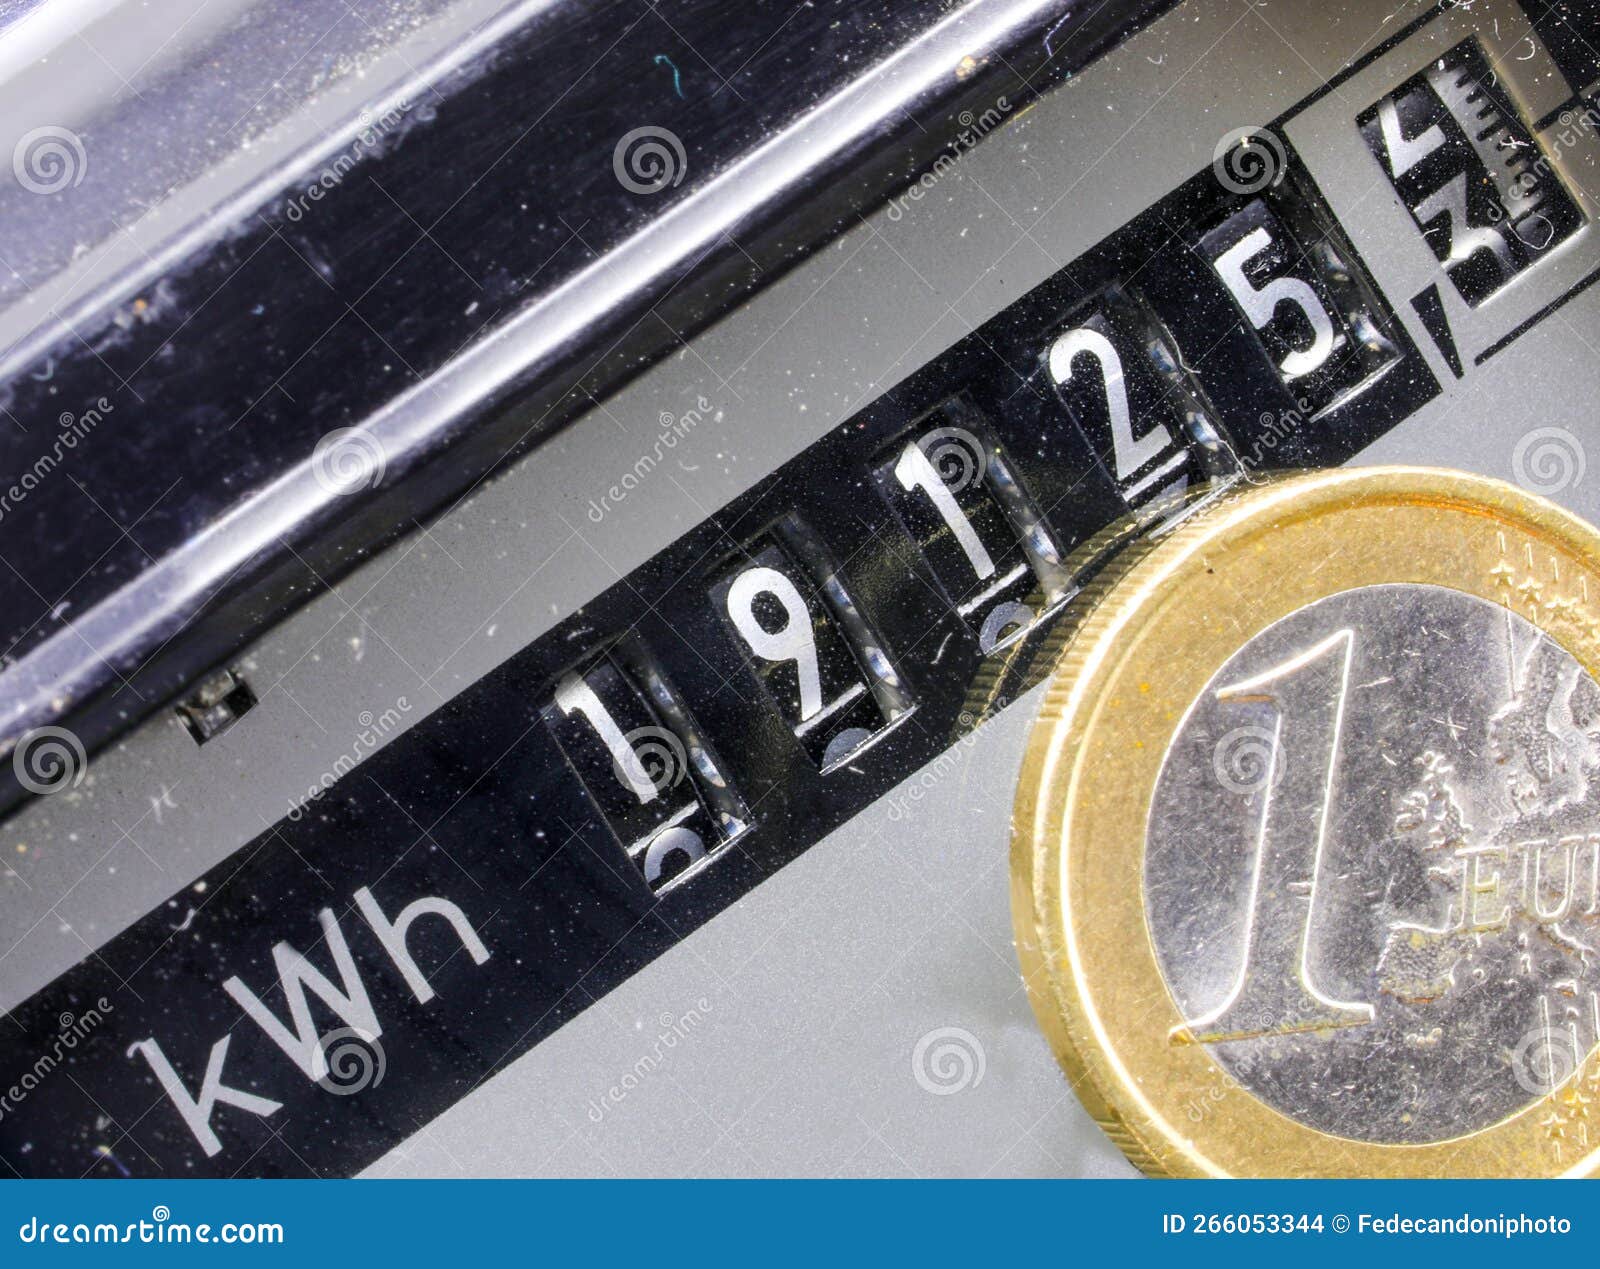 electric counter kwh to measure the electricity consumed and euro coins